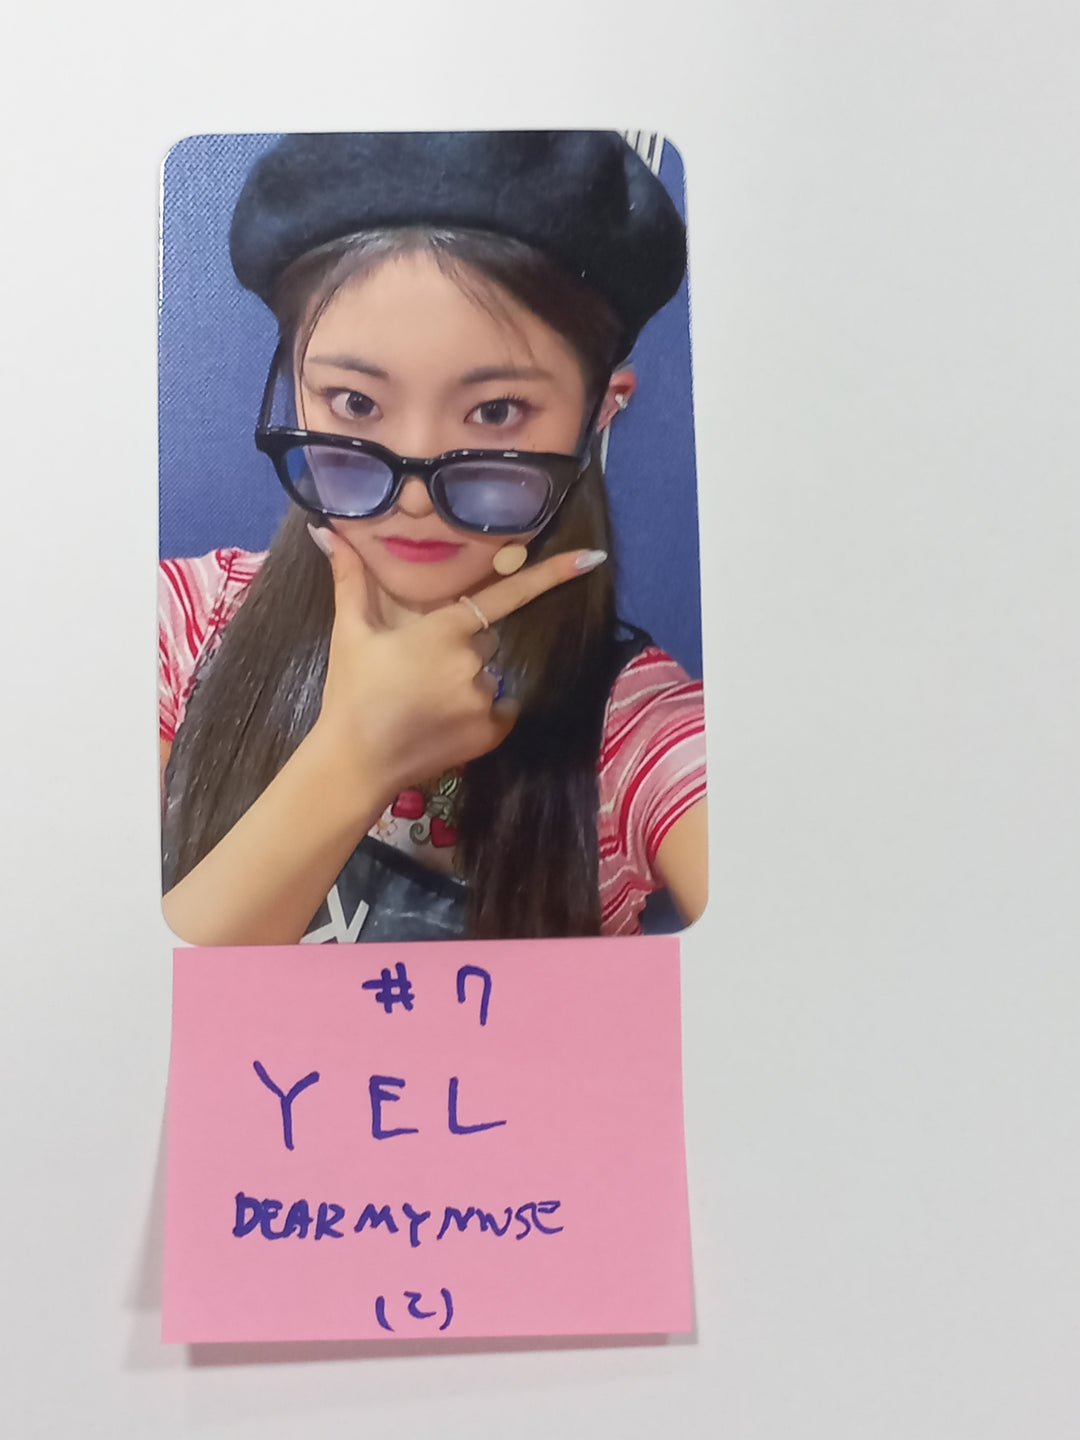 H1-KEY "Seoul Dreaming" - Dear My Muse Fansign Event Photocard [23.10.10]